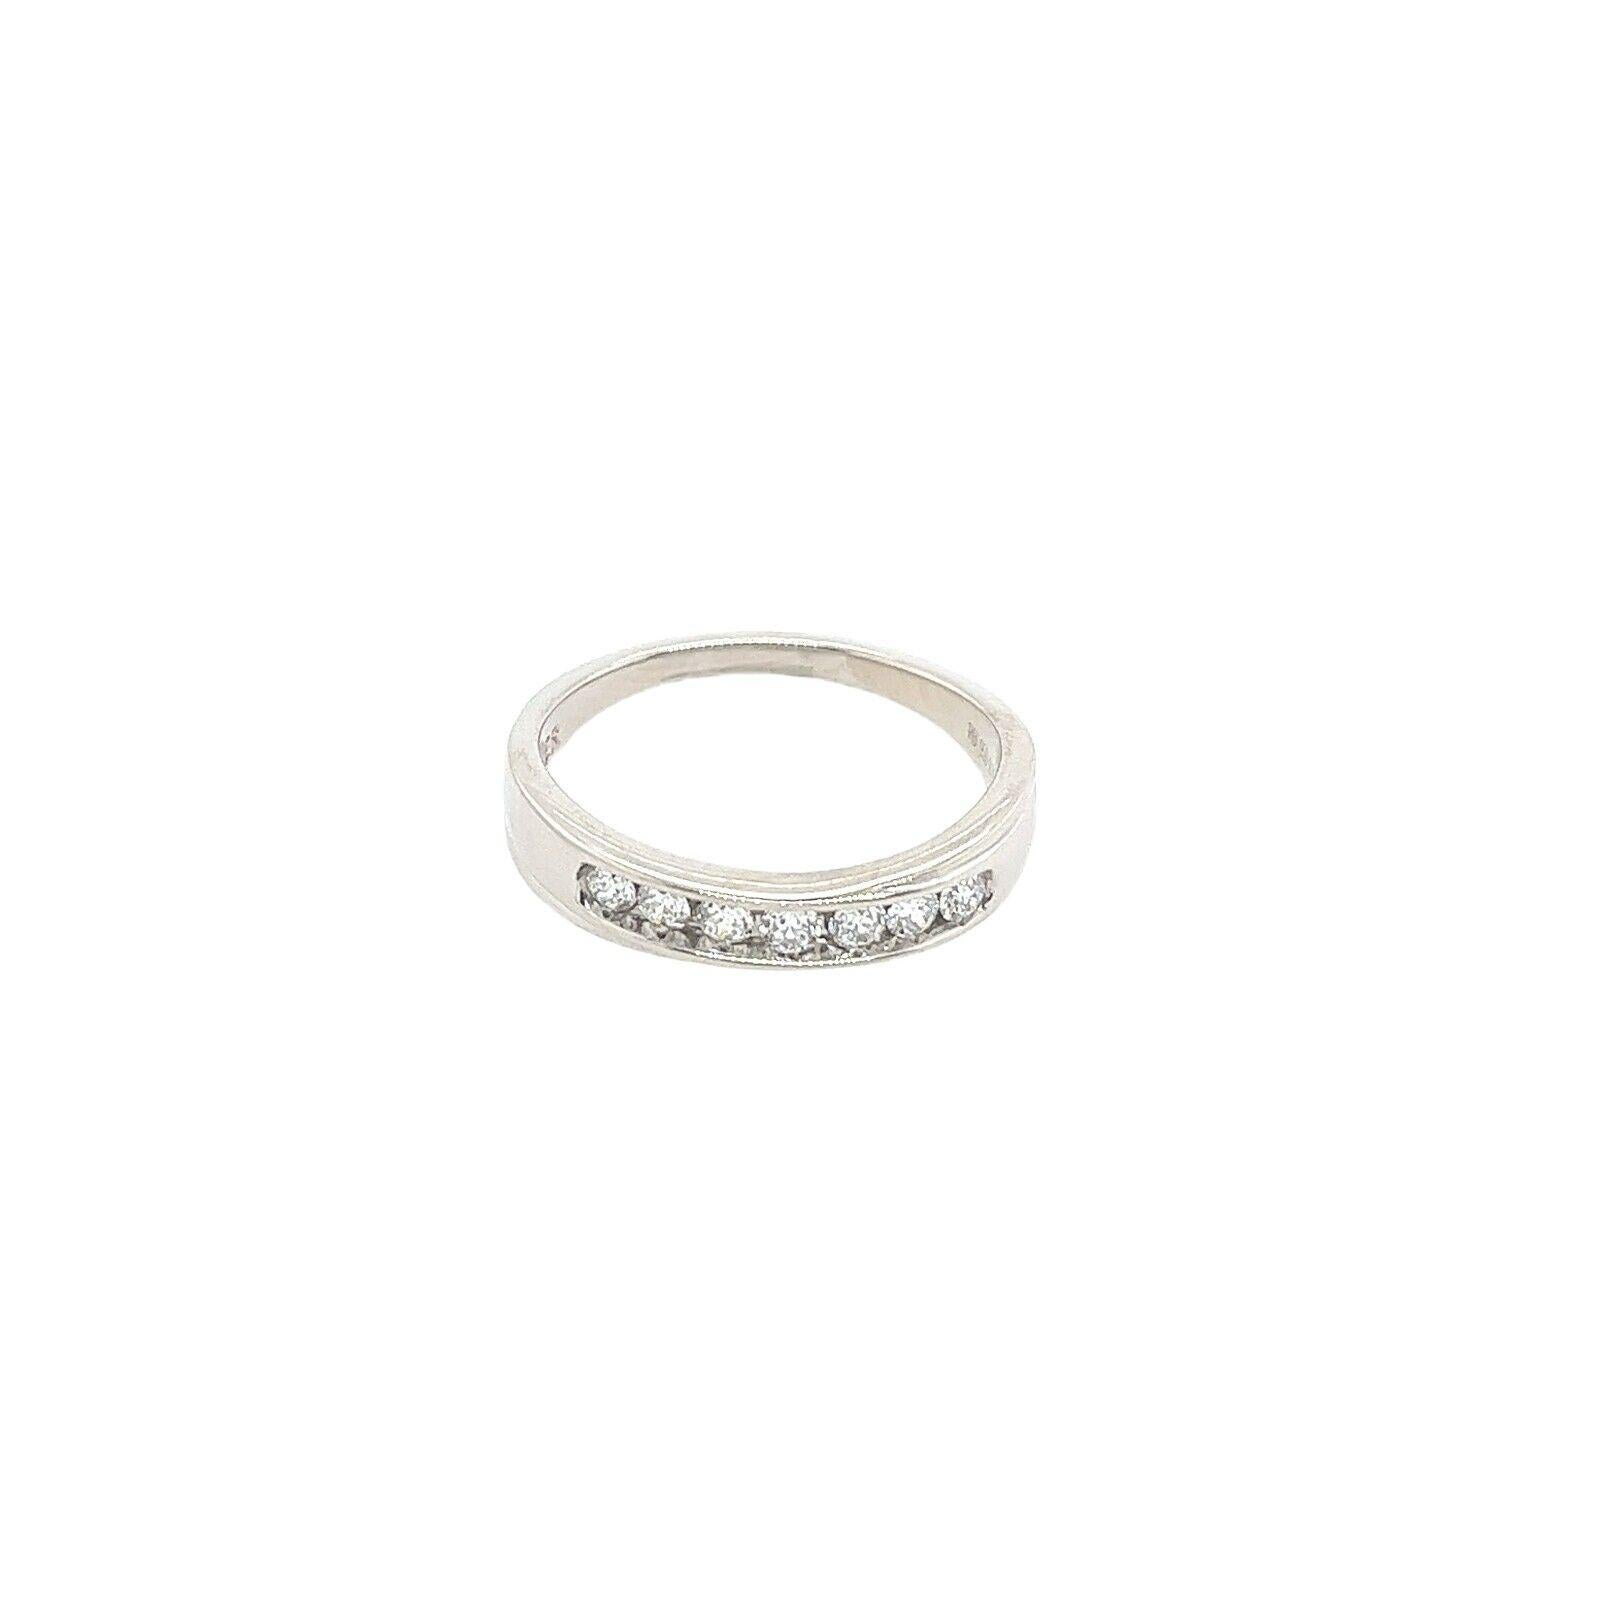 This Platinum Diamond half eternity band is set with 7 round brilliant cut Diamonds, in total 0.28ct of Diamonds, with 